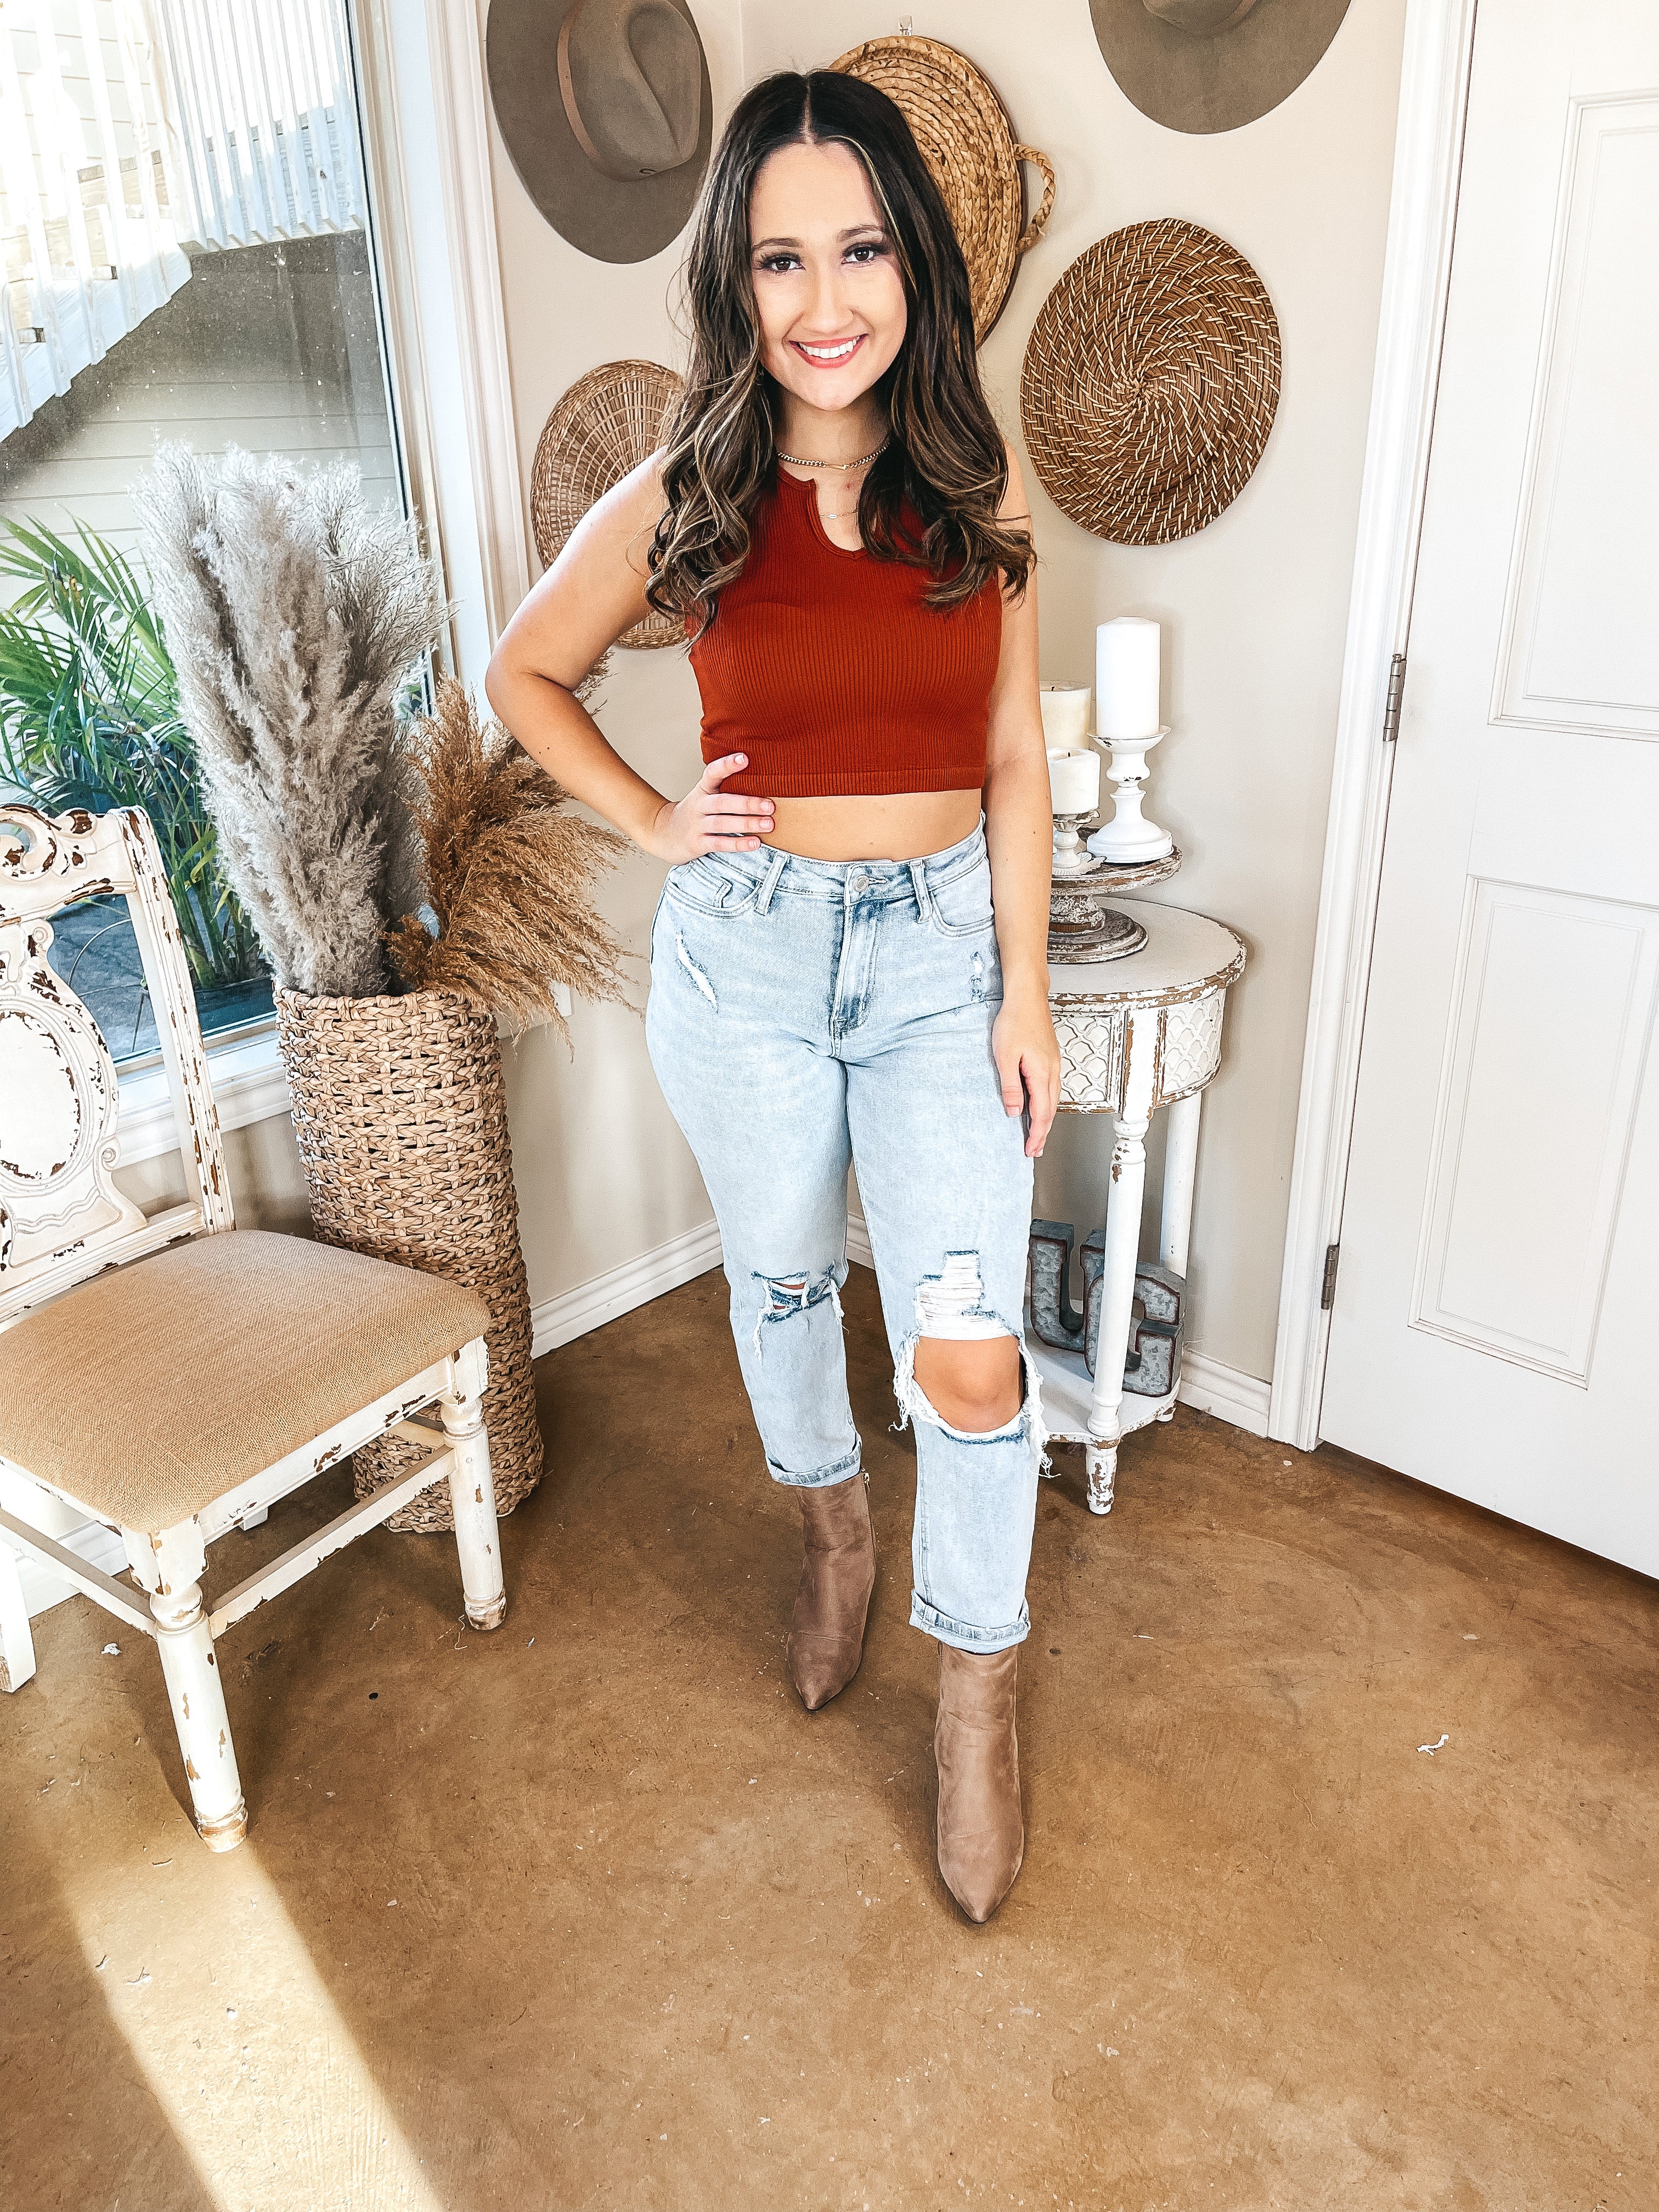 Dream Babe Notched Neckline Crop Tank Top in Rust Red - Giddy Up Glamour Boutique